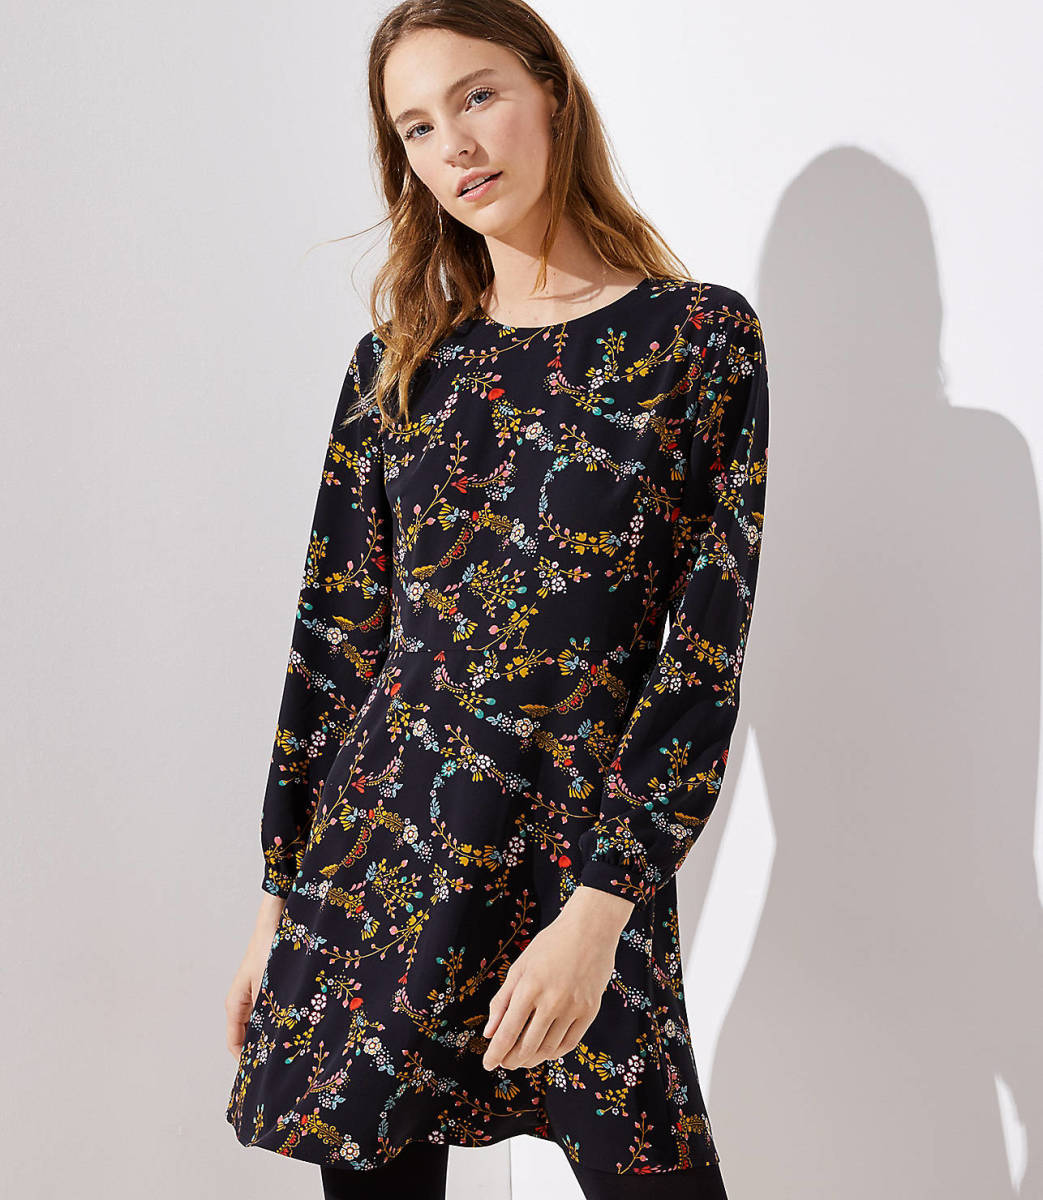 Loft Flower Garland Flare Dress, $89.50, available here.